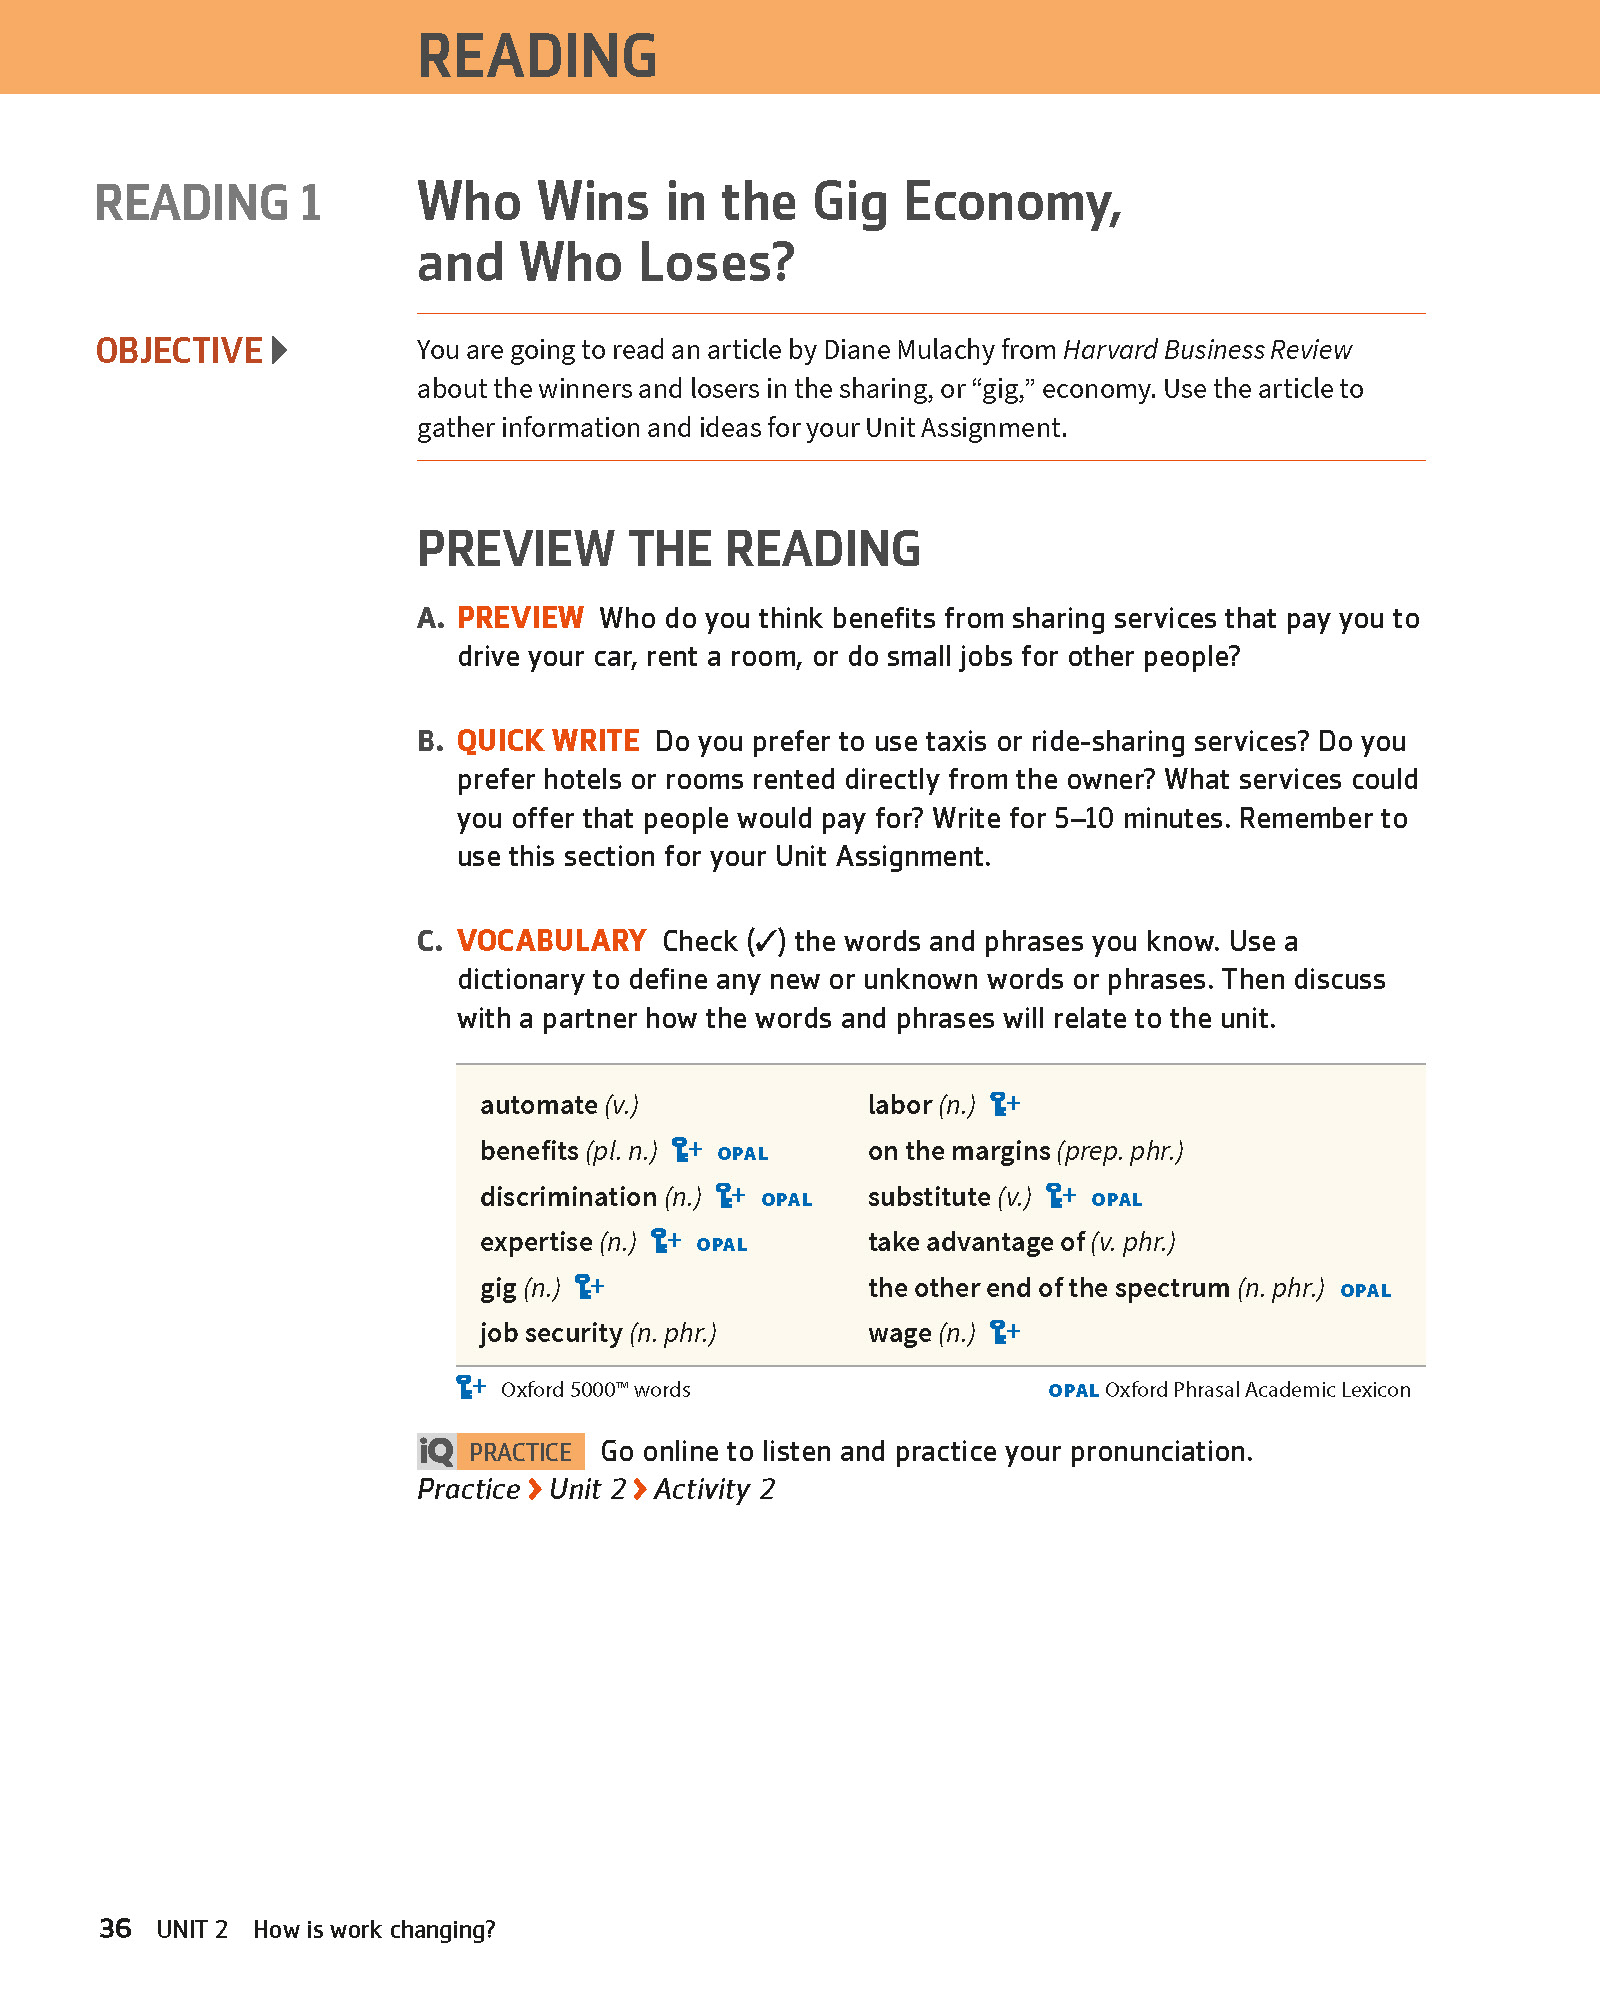 Q: Skills for Success 3rd Edition: Level 5: Reading & Writing Student Book with IQ Online Practice